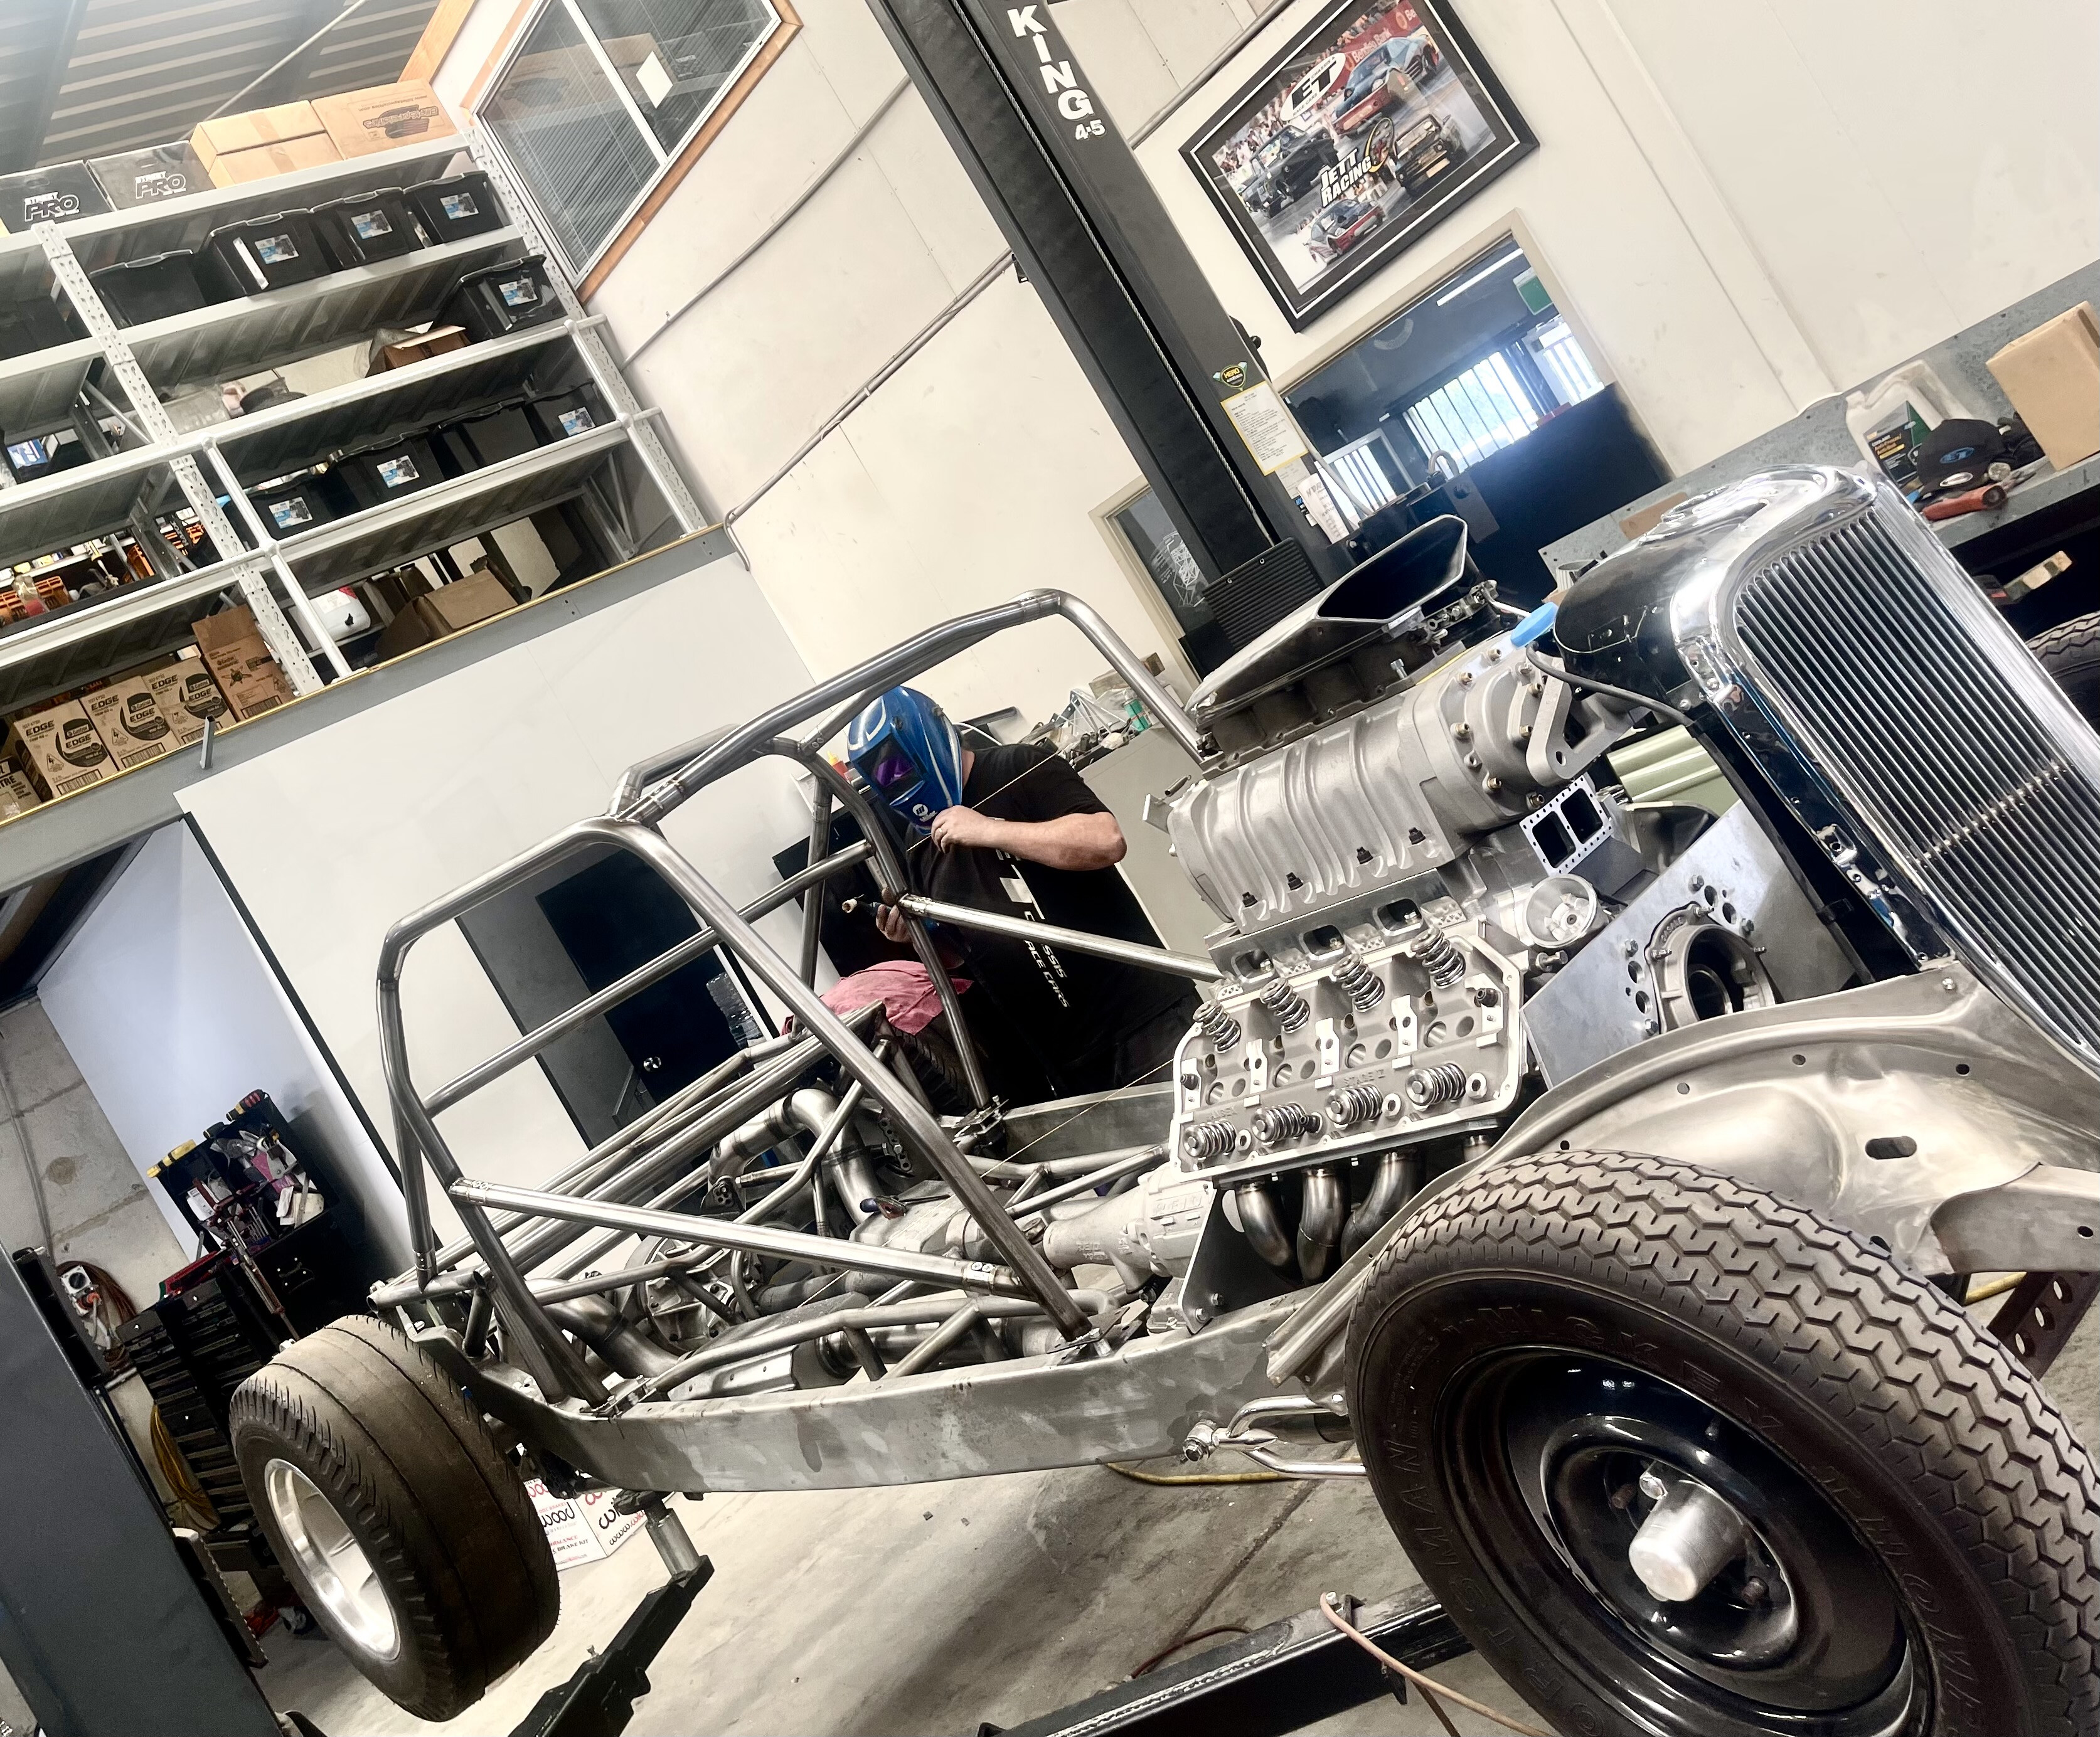 Street Machine Features Luke Croft Hot Rod Build Chassis